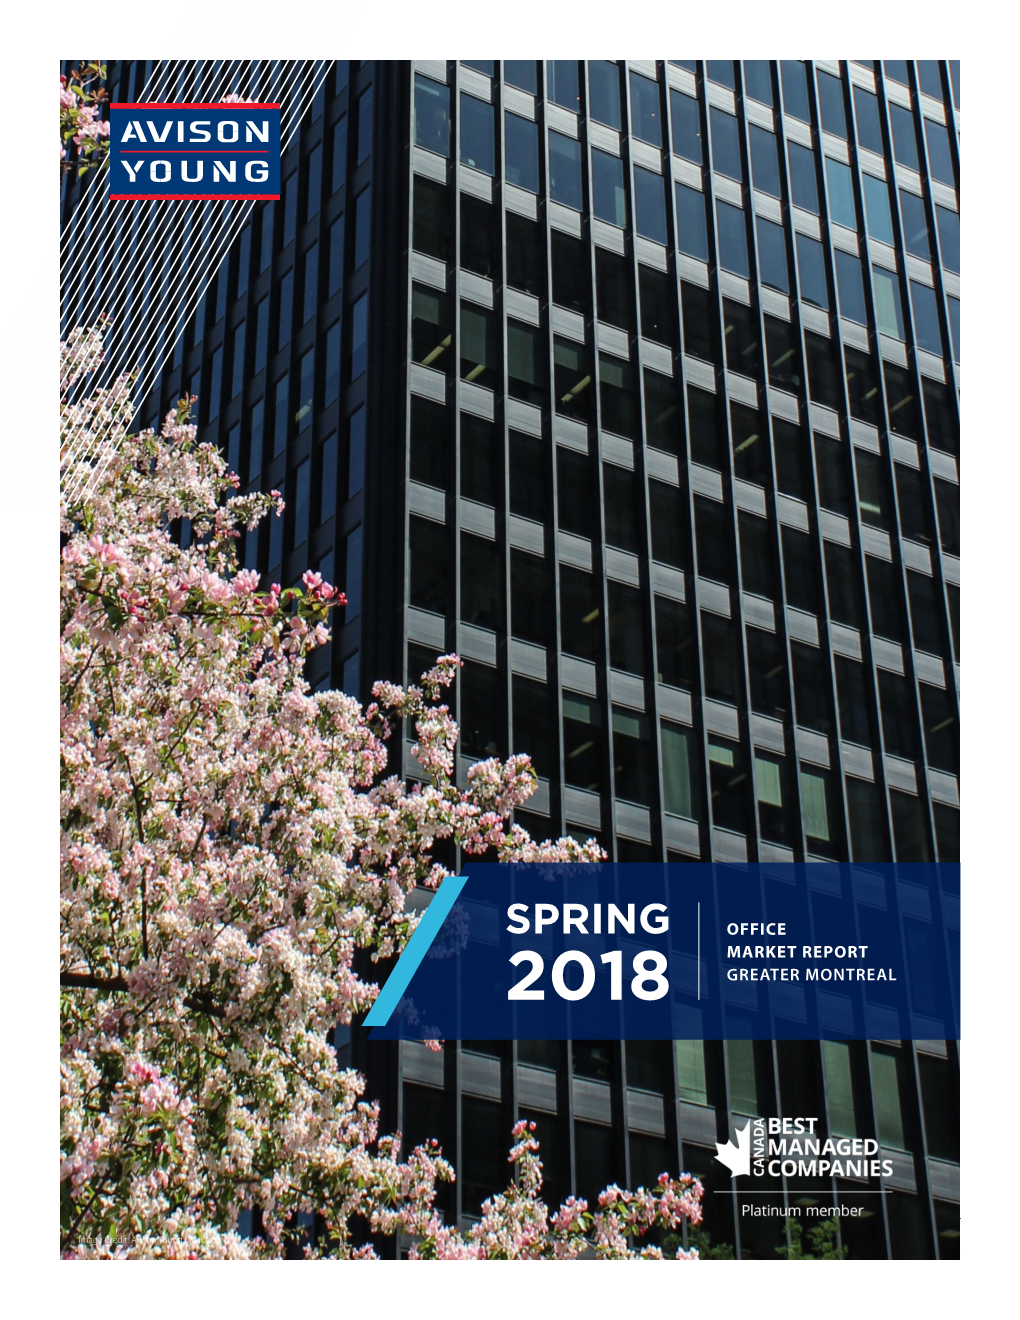 Spring Office Market Report 2018 Greater Montreal